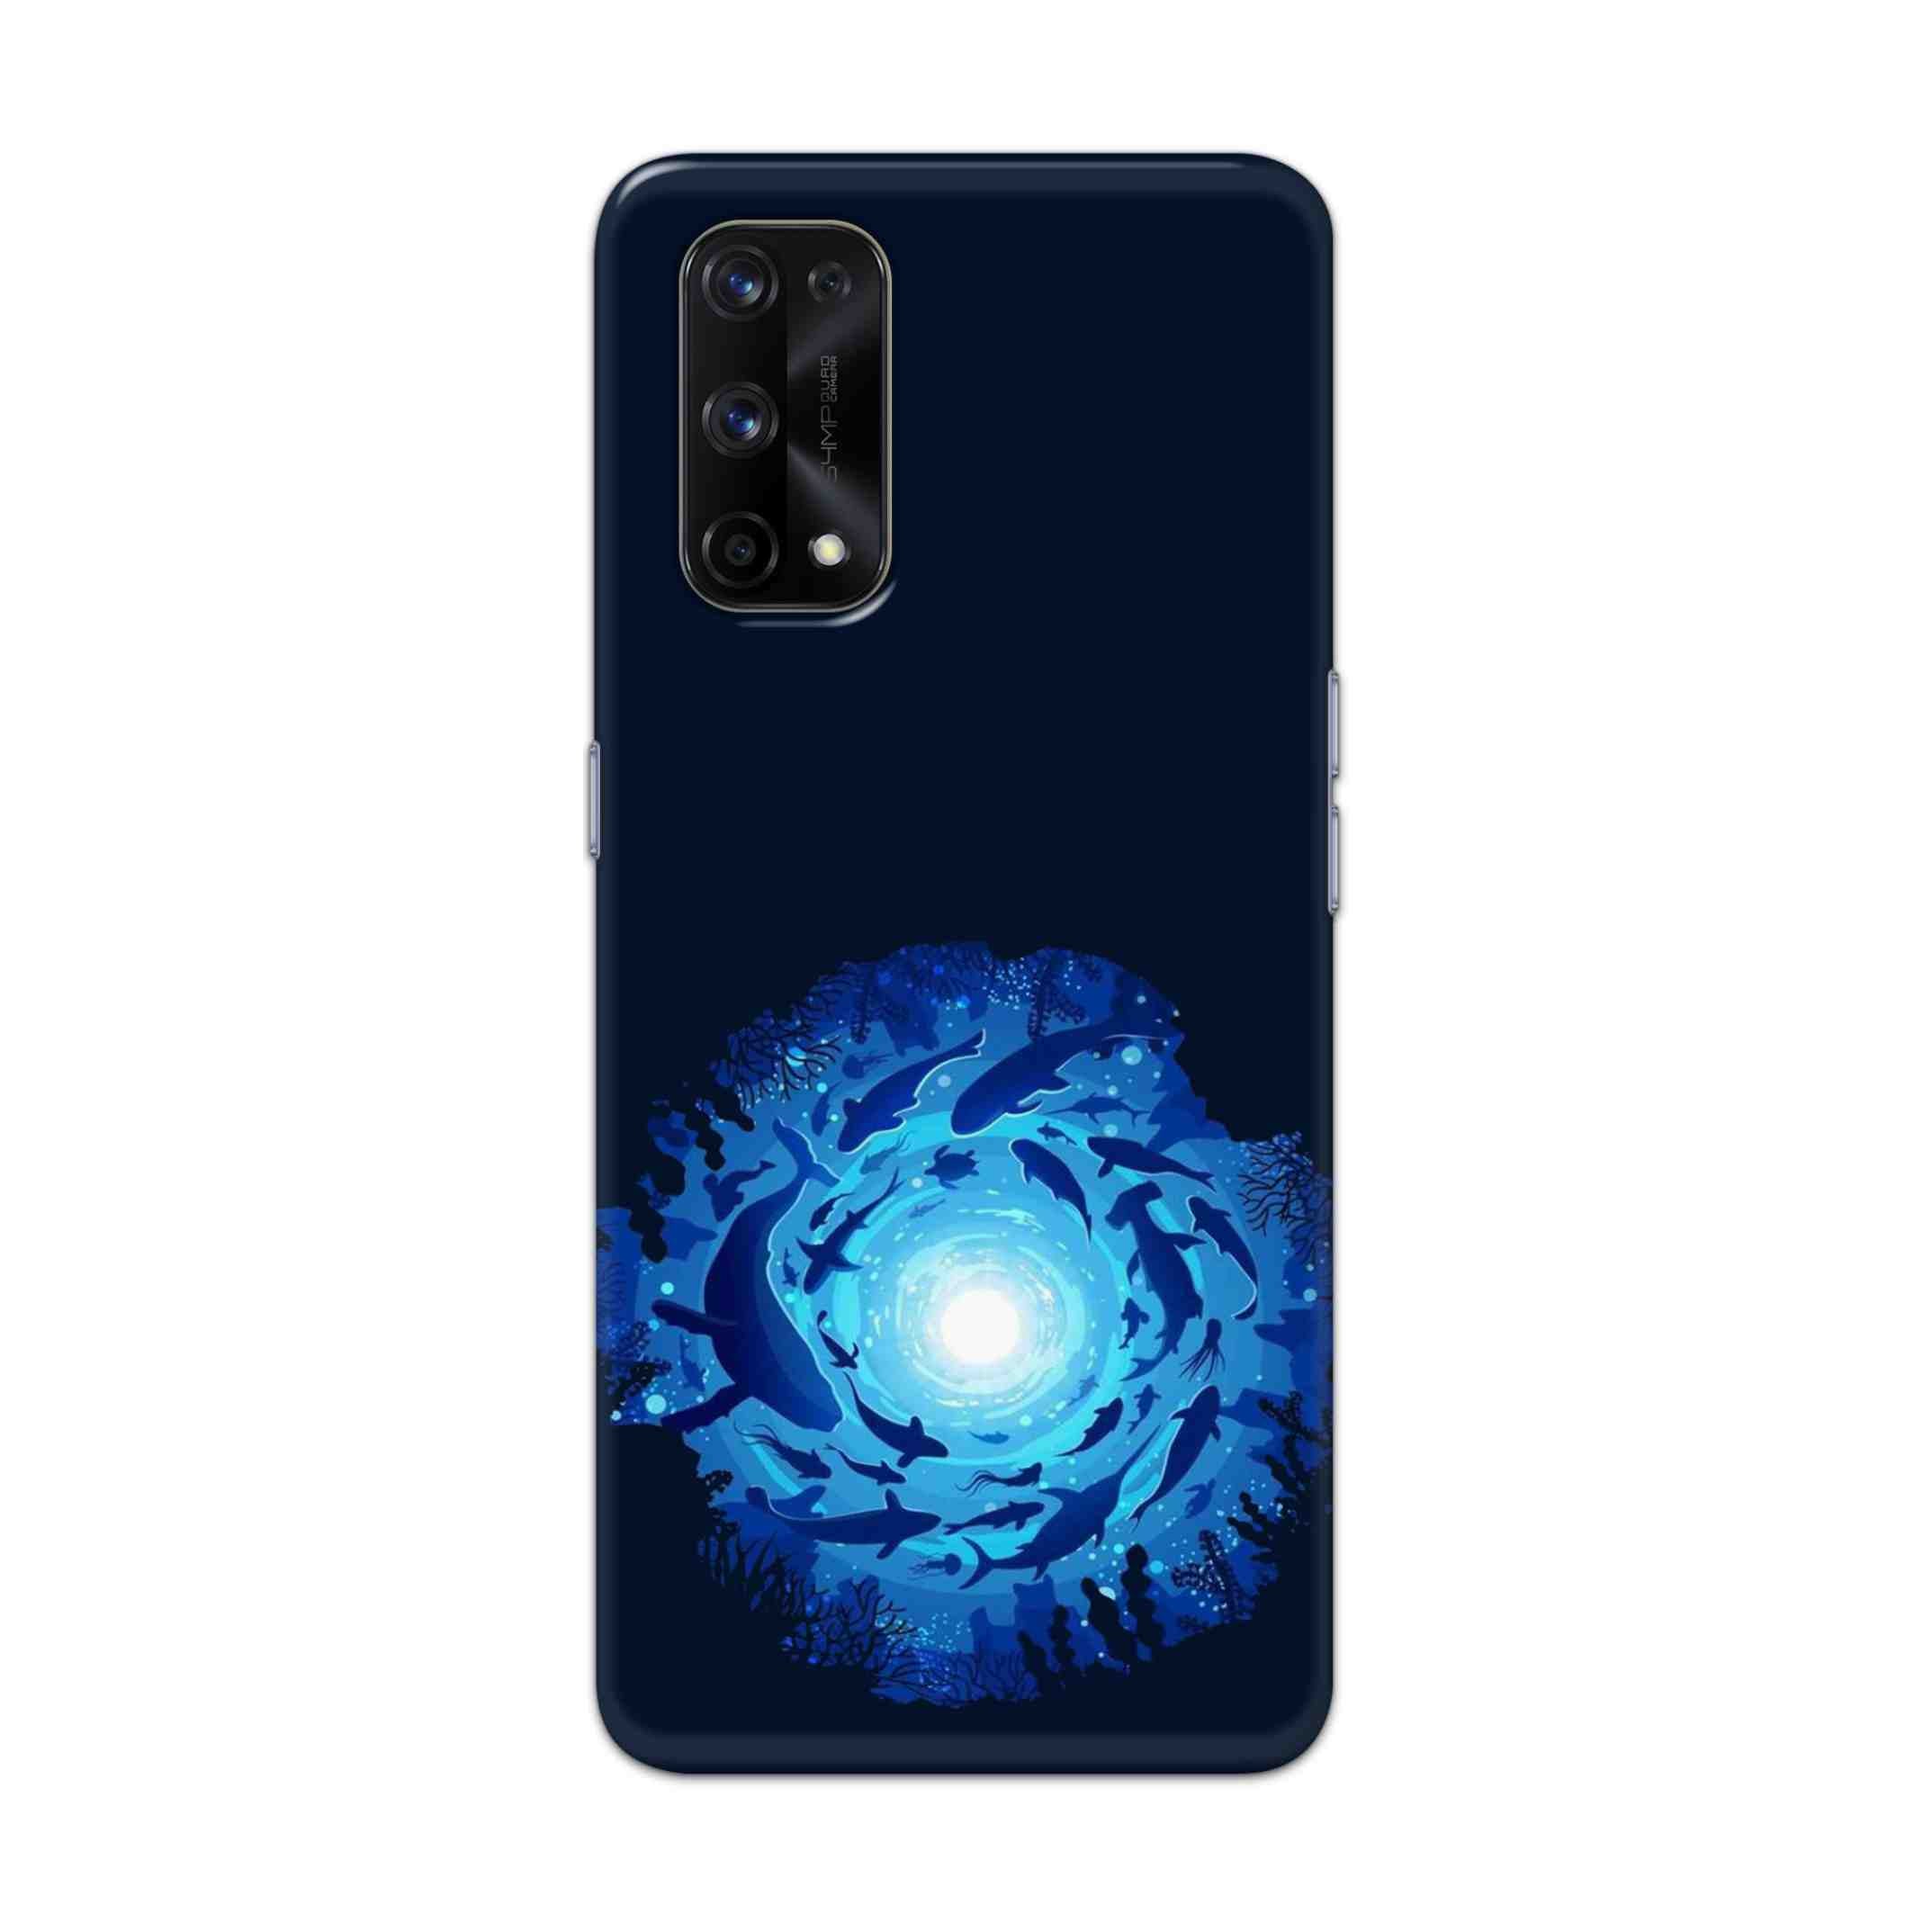 Buy Blue Whale Hard Back Mobile Phone Case Cover For Realme X7 Pro Online